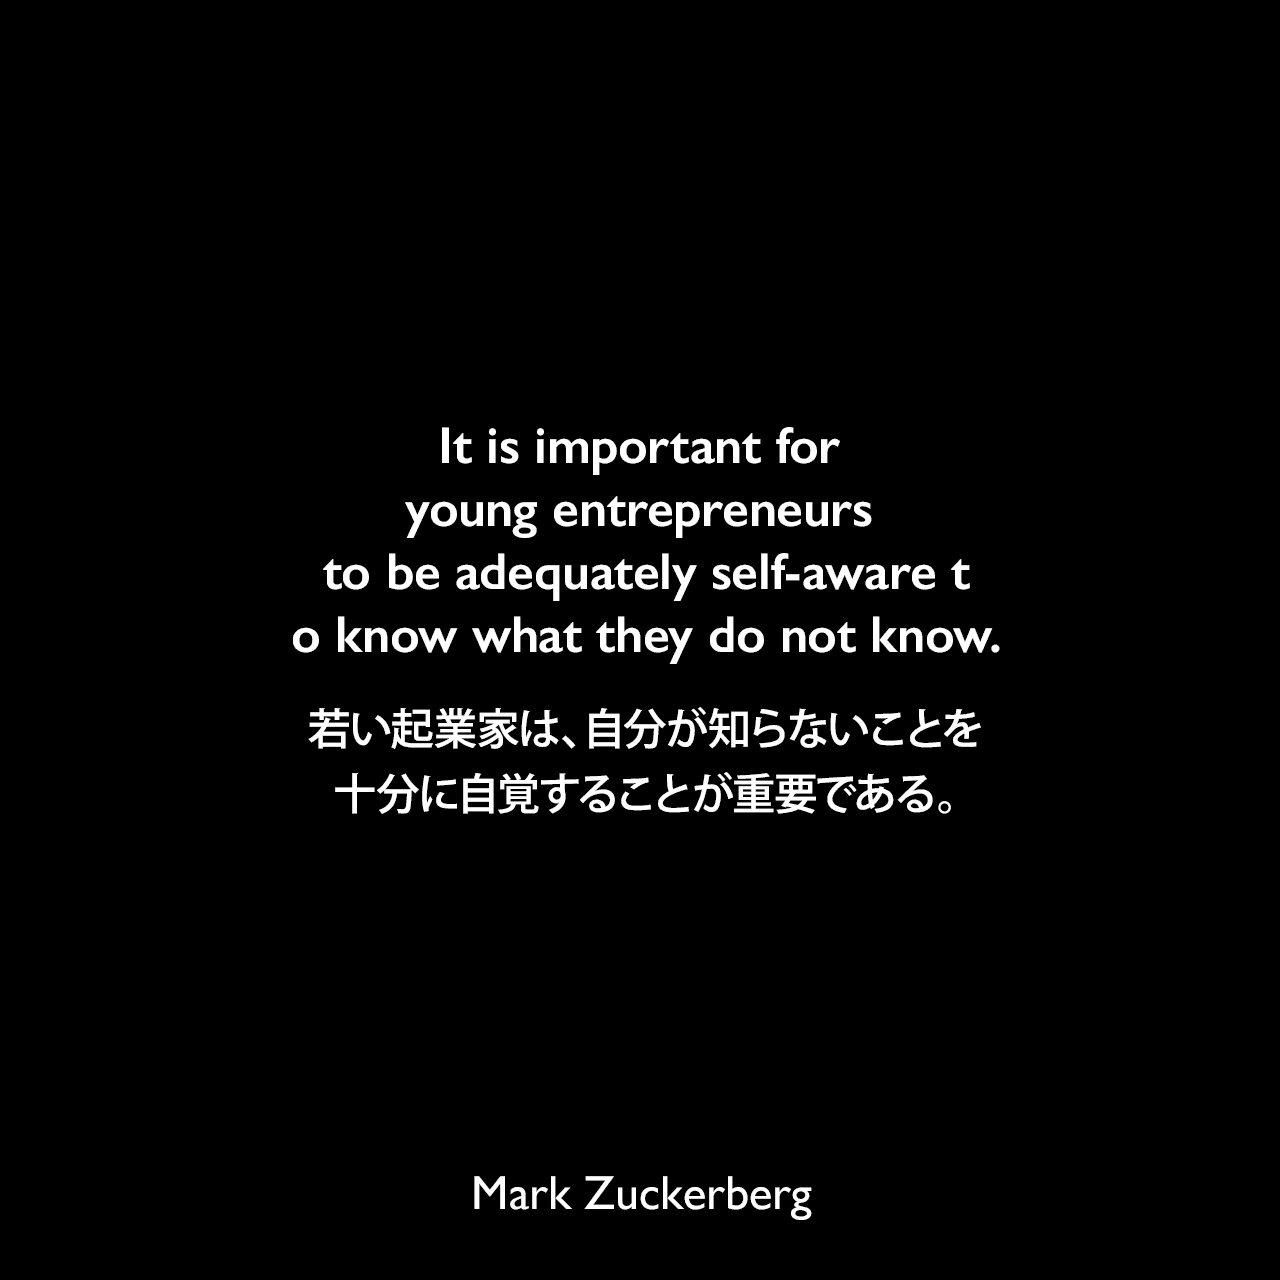 It is important for young entrepreneurs to be adequately self-aware to know what they do not know.若い起業家は、自分が知らないことを十分に自覚することが重要である。Mark Zuckerberg